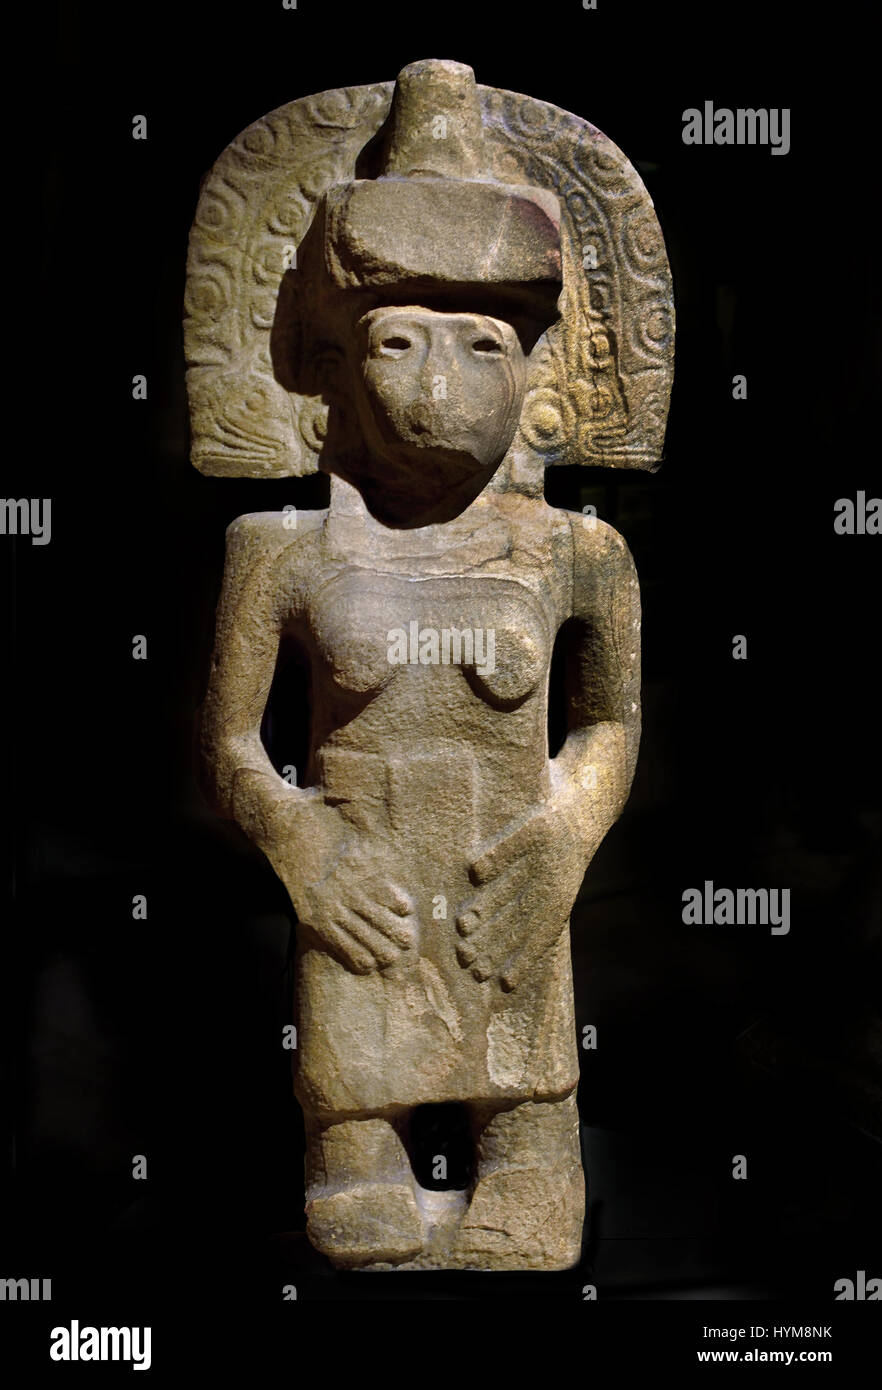 Stone figure of the Huaxtec goddess Tlazolteotl - Huaxtec 900-1450 Mexico ( The Mayans - Maya civilization was a Mesoamerican civilization in Yucatán  Mexico and Belize in Central America ( 2600 BC - 1500 AD ) Pre Columbian American ) Stock Photo